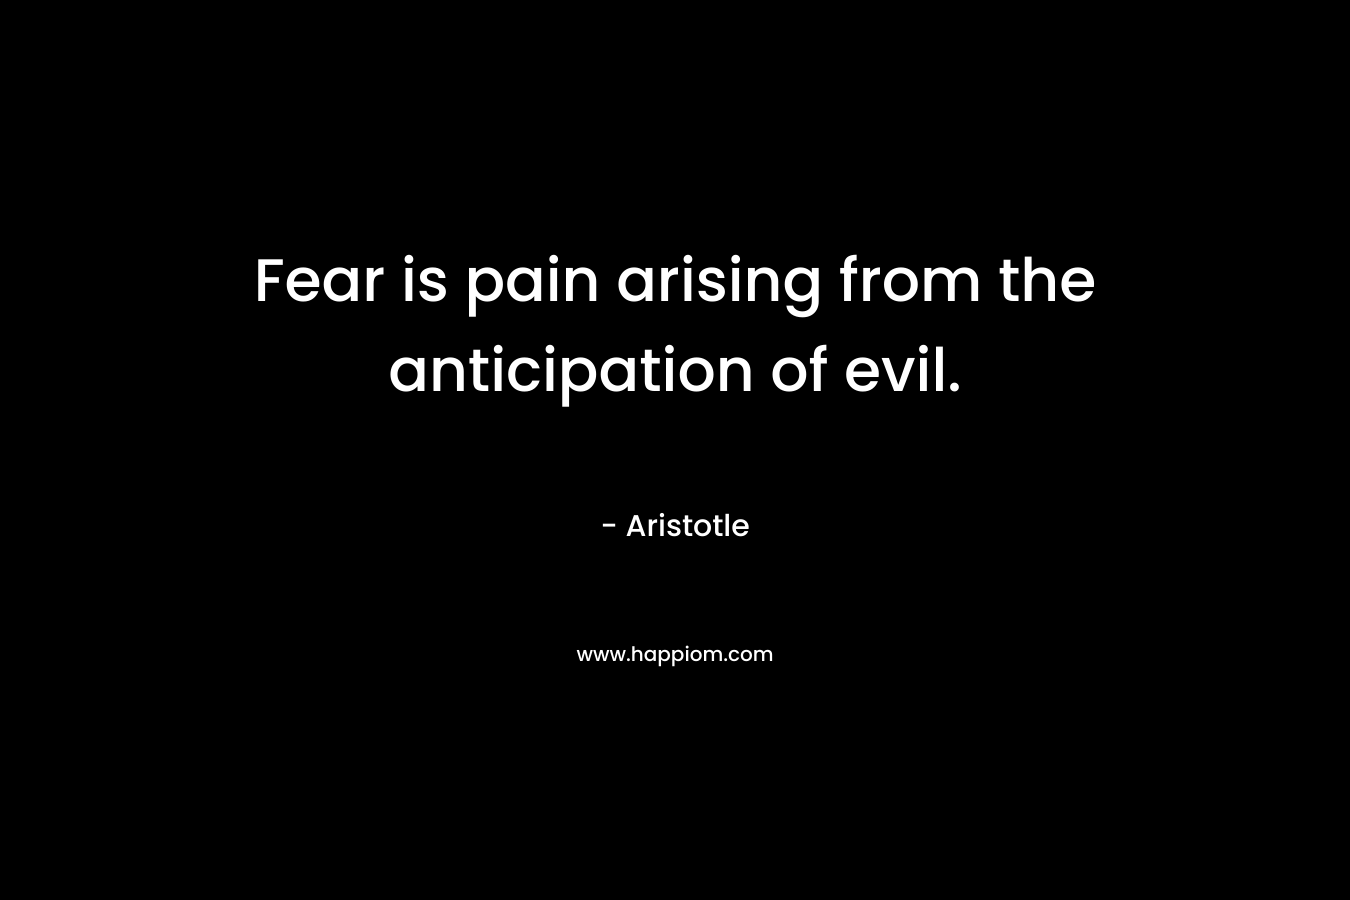 Fear is pain arising from the anticipation of evil. – Aristotle